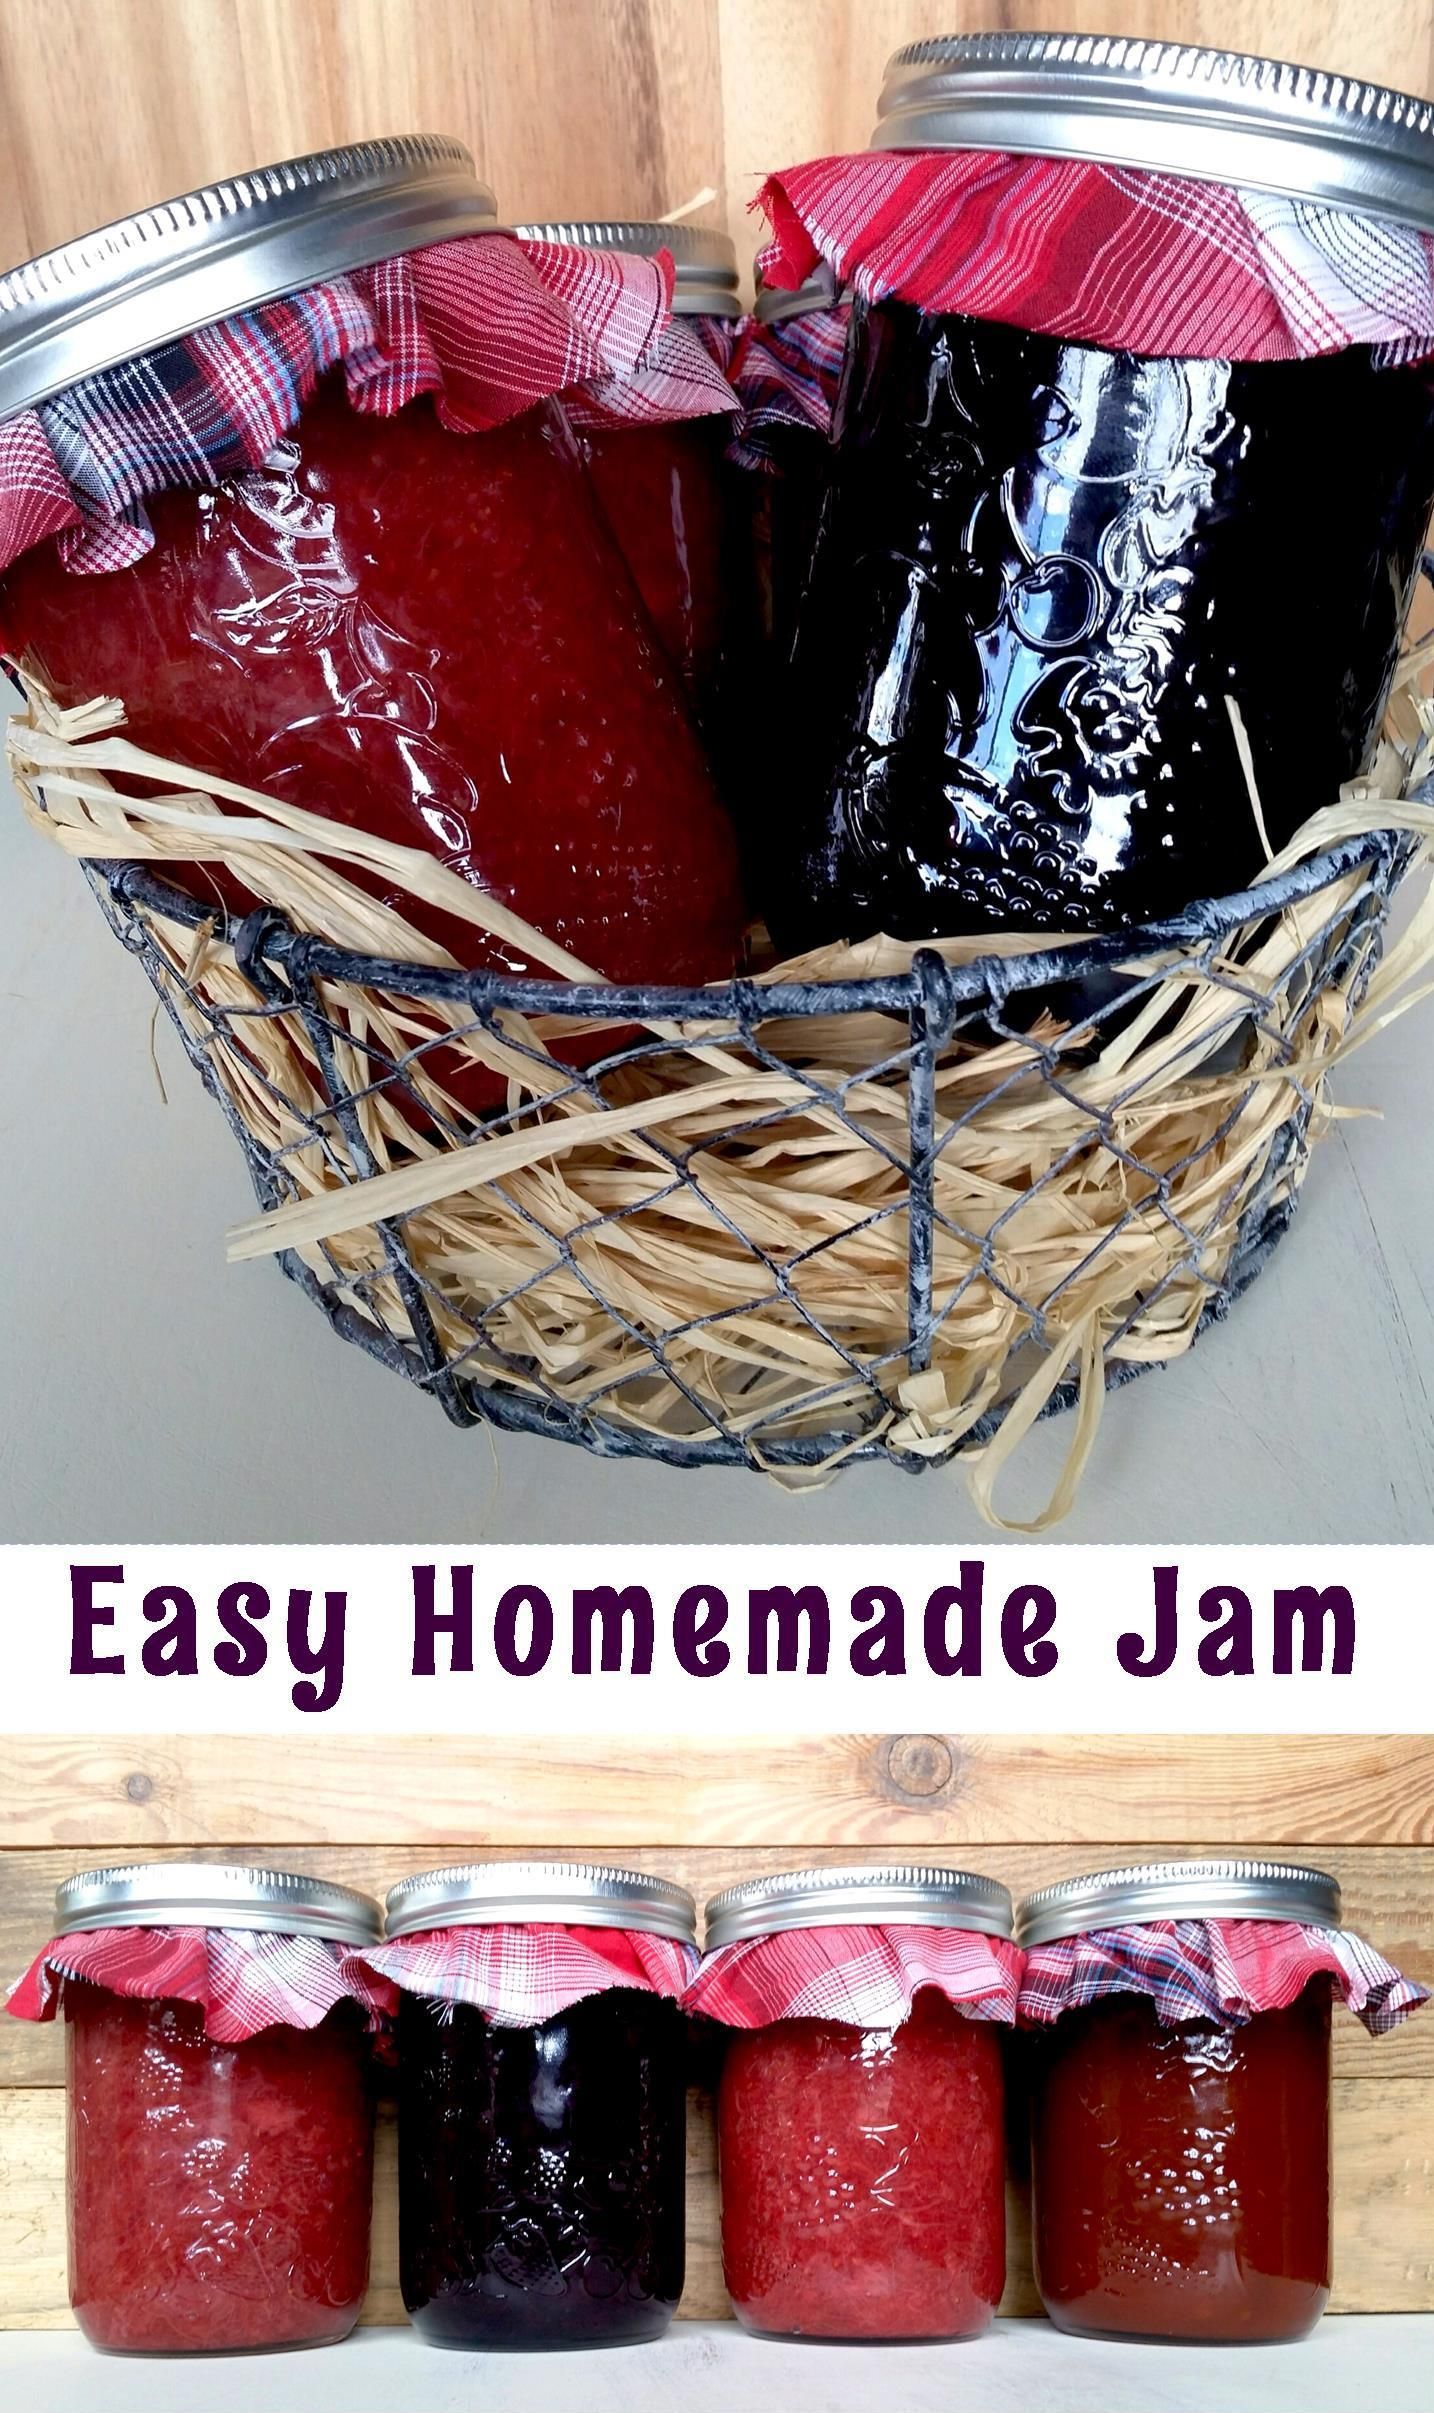 Easy homemade jam using only three ingredients. Any combination of fruit or berries will work for this recipe.